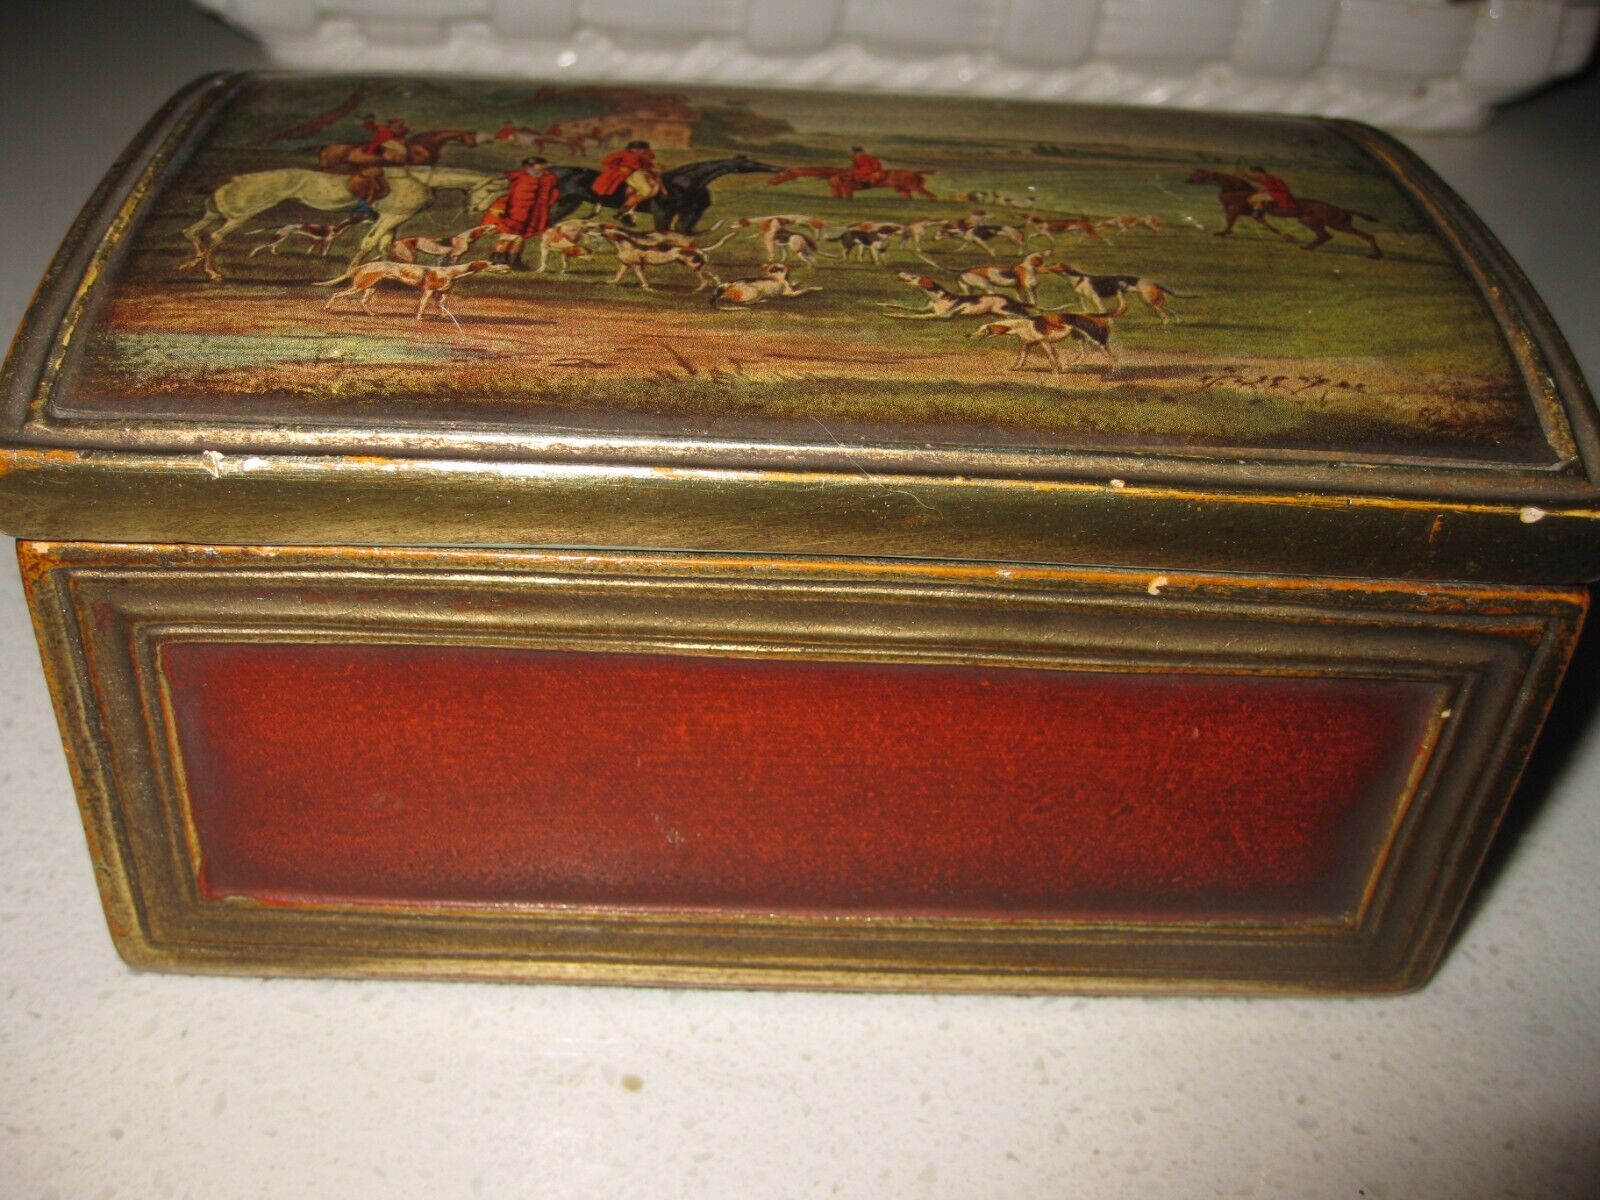 Vintage Borghese Equestrian English Hunt Horse Scene Trinklet Jewelry Box